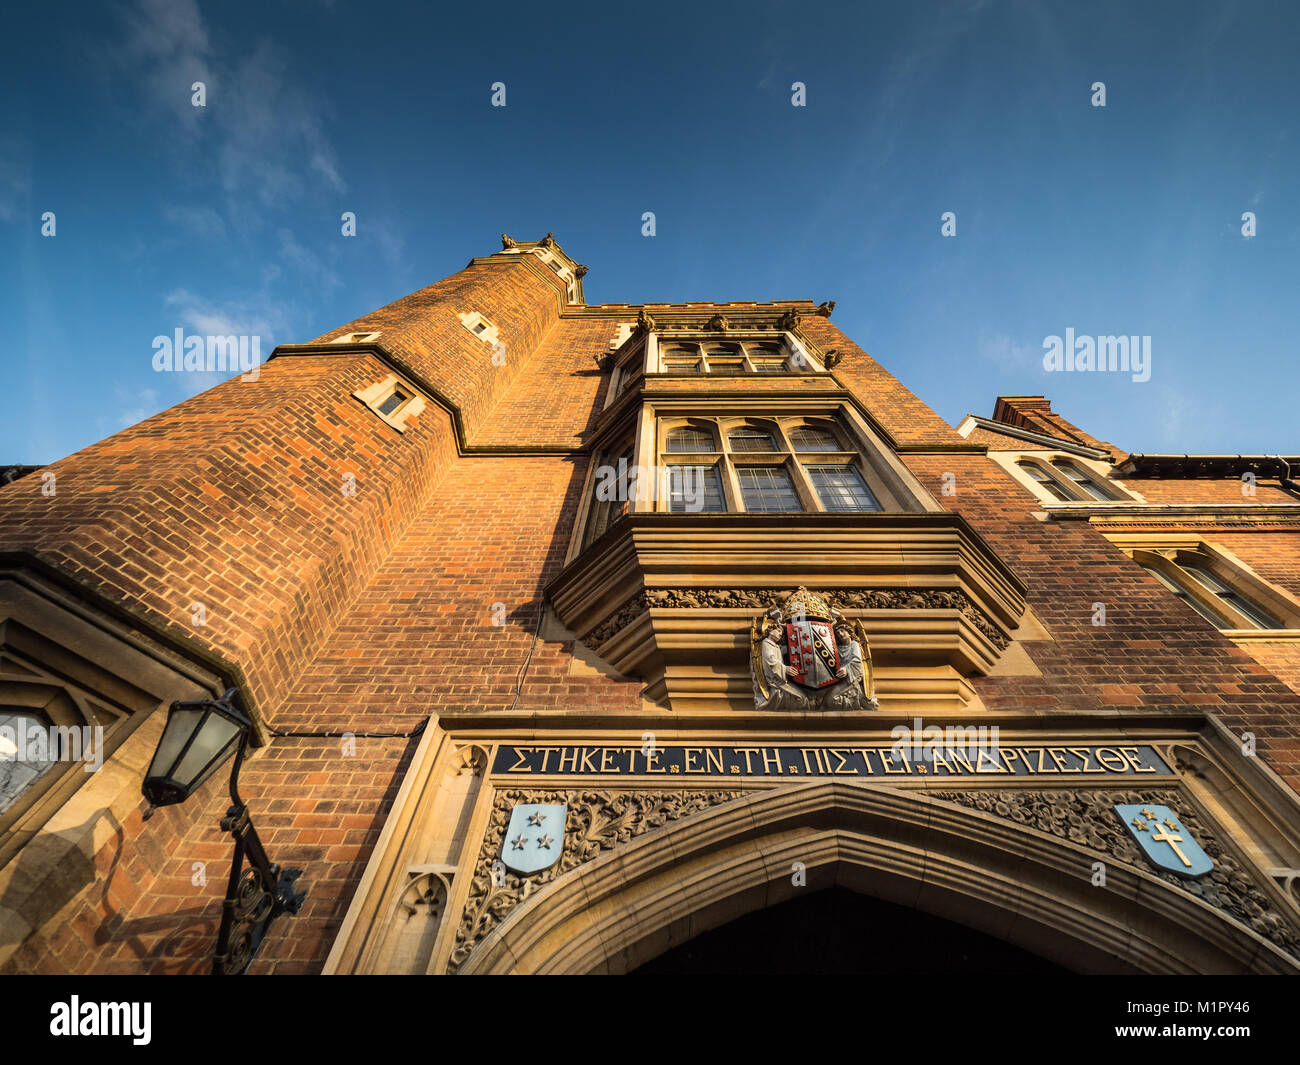 Selwyn College Cambridge - Main Gate with the Greek quotation which contains the College motto ("Quit ye like men" or "Be Courageous") Stock Photo